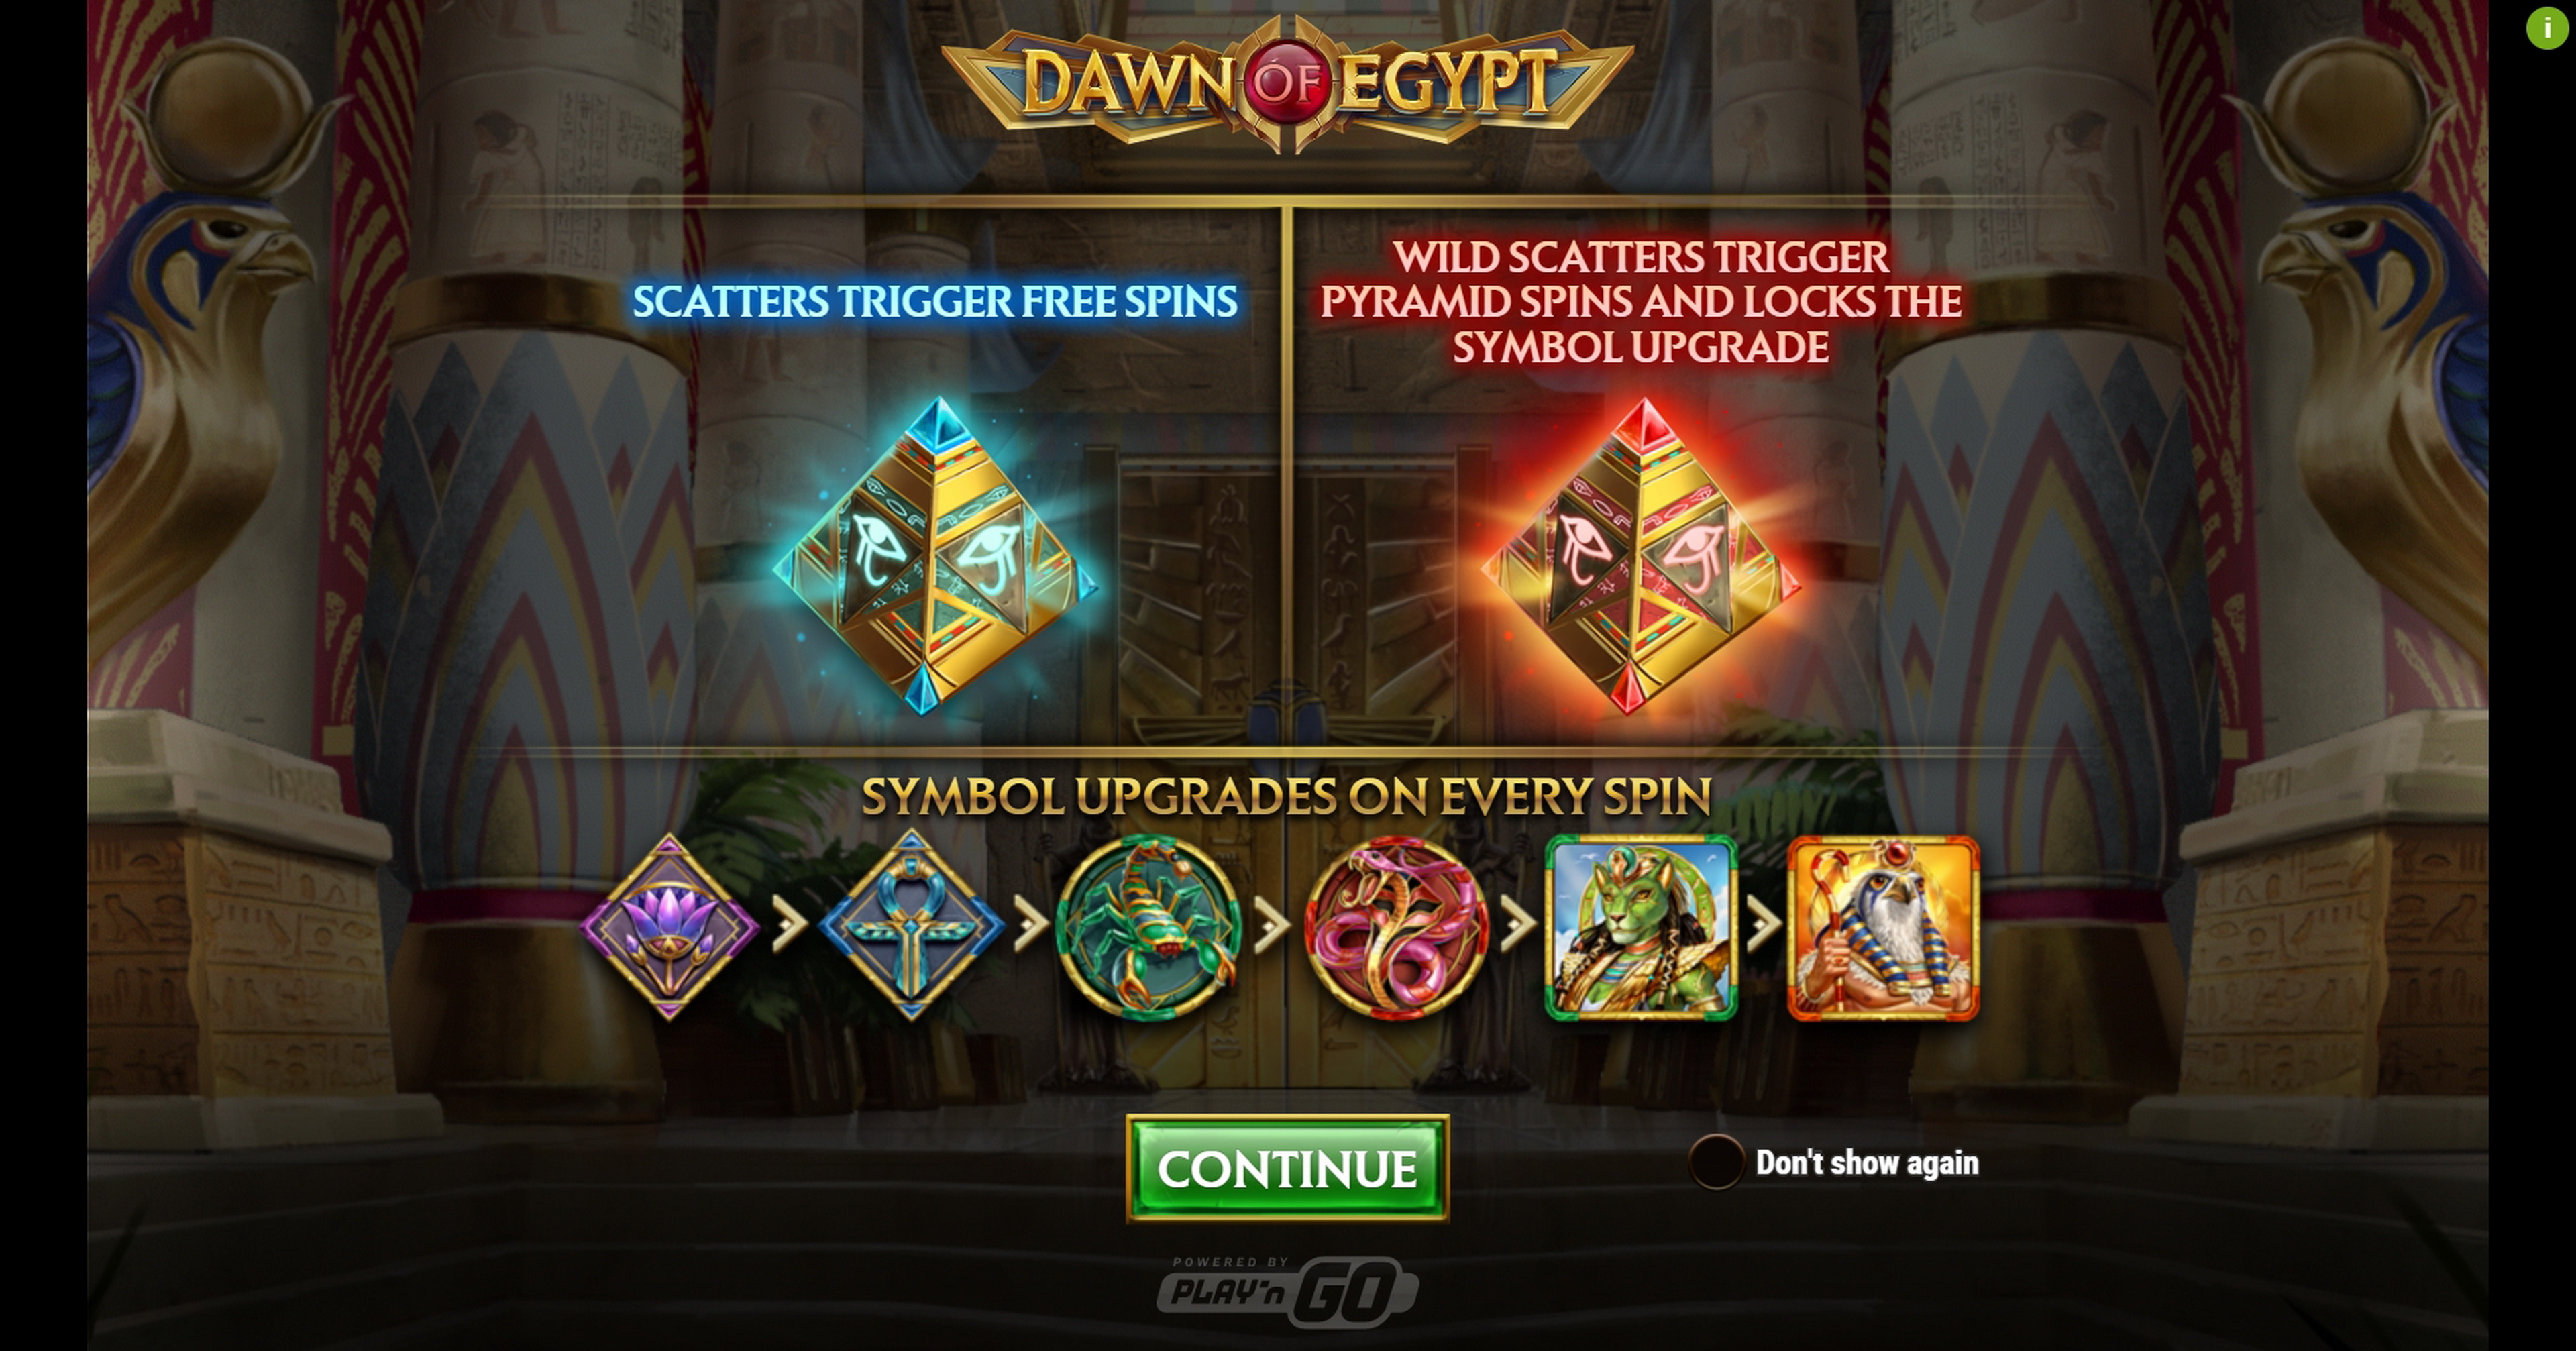 Play Dawn of Egypt Free Casino Slot Game by Playn GO